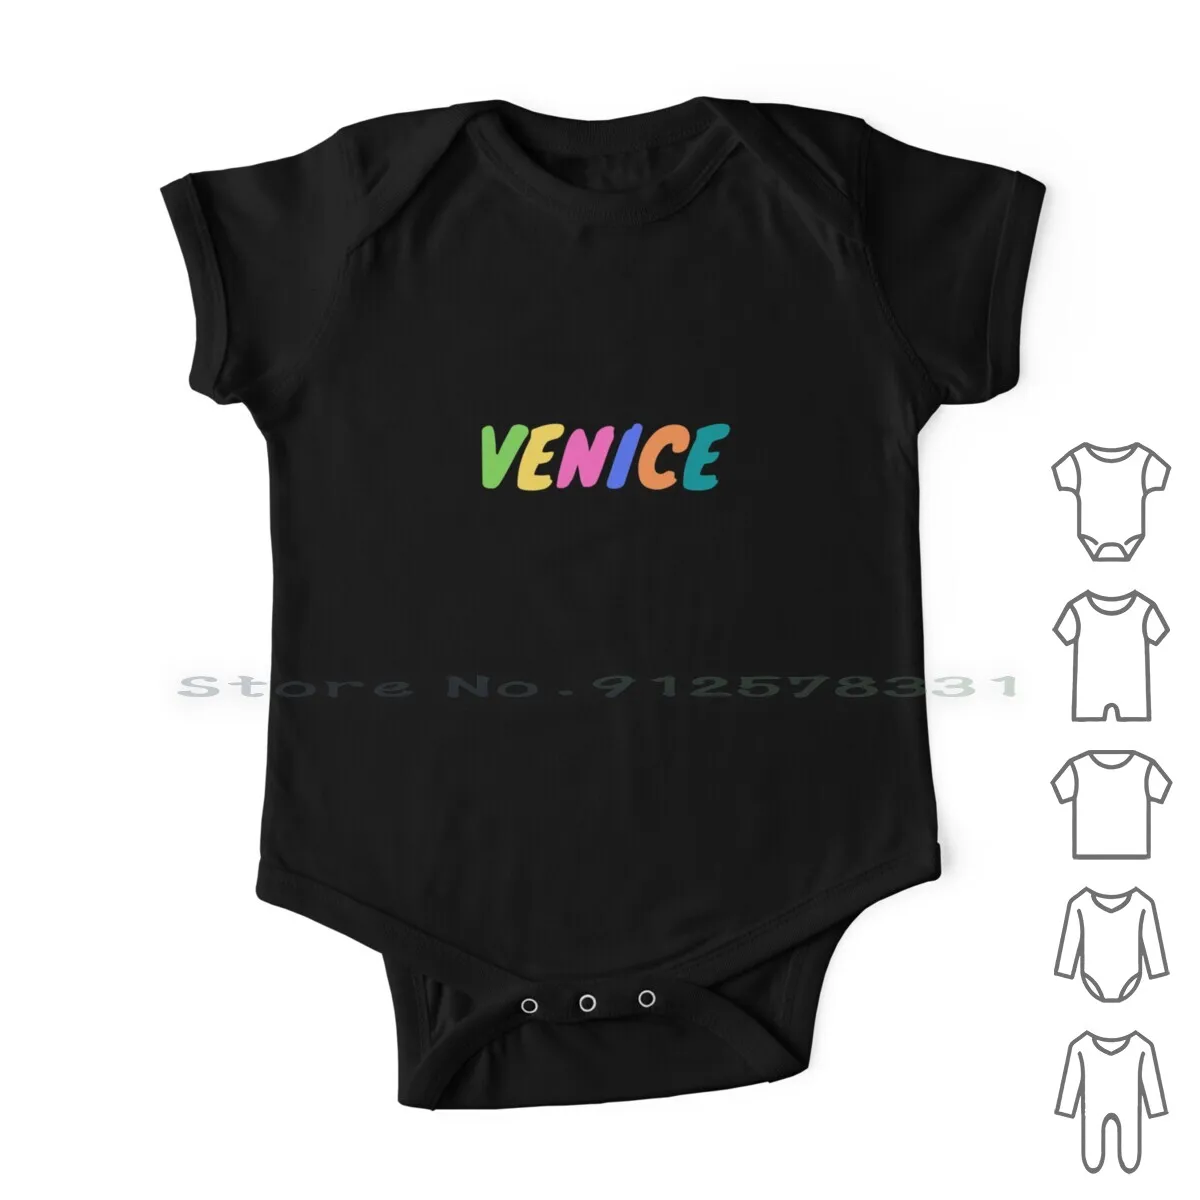 

Venice Newborn Baby Clothes Rompers Cotton Jumpsuits Venice Colorful Text Rainbow Colors Popular Cities Italy Italian Capital